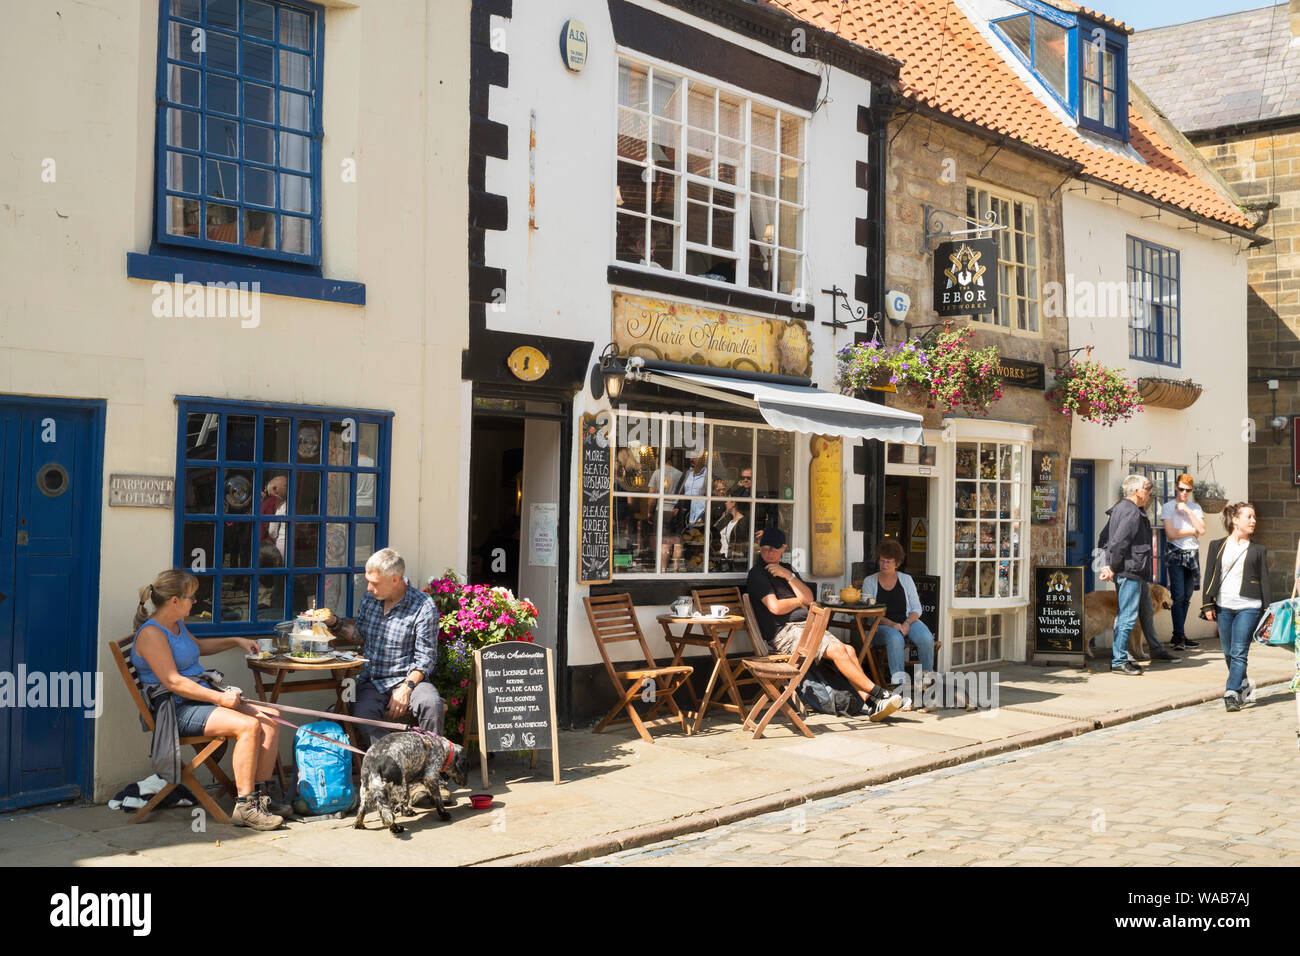 People sitting outside Marie Antoinettes cafe in Church St, Whitby, Yorkshire, England, UK Stock Photo